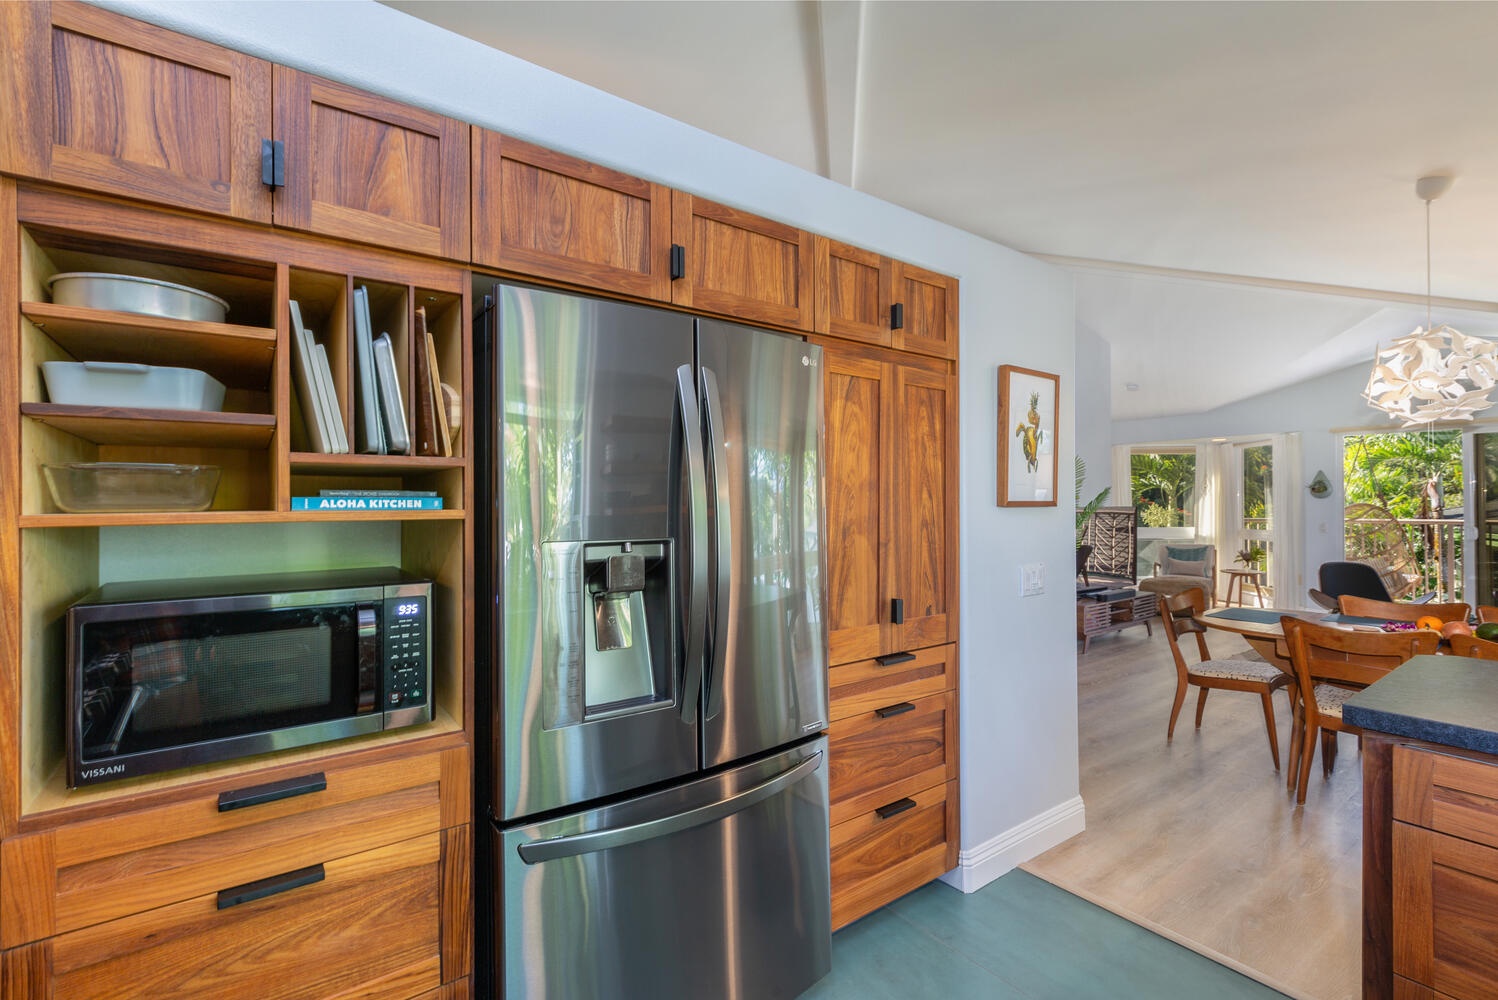 Princeville Vacation Rentals, Sea Glass - Stainless steel appliances with lots of wooden cabinetry to store your kitchen essentials.